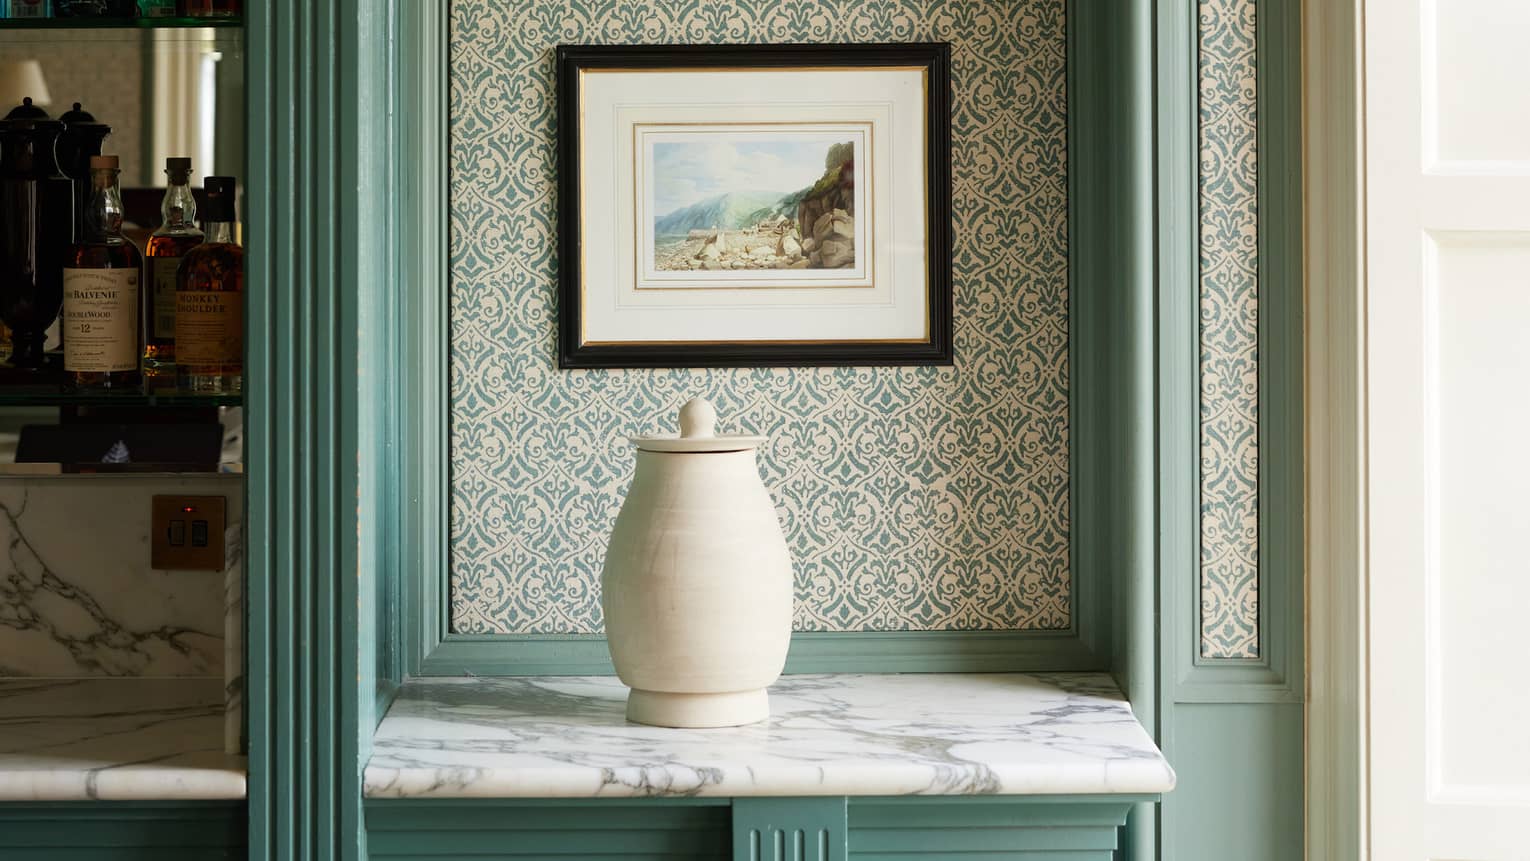 Wallpapered nook with white ceramic jar on marble shelf, two stacked prints on wall and blue moulding surround